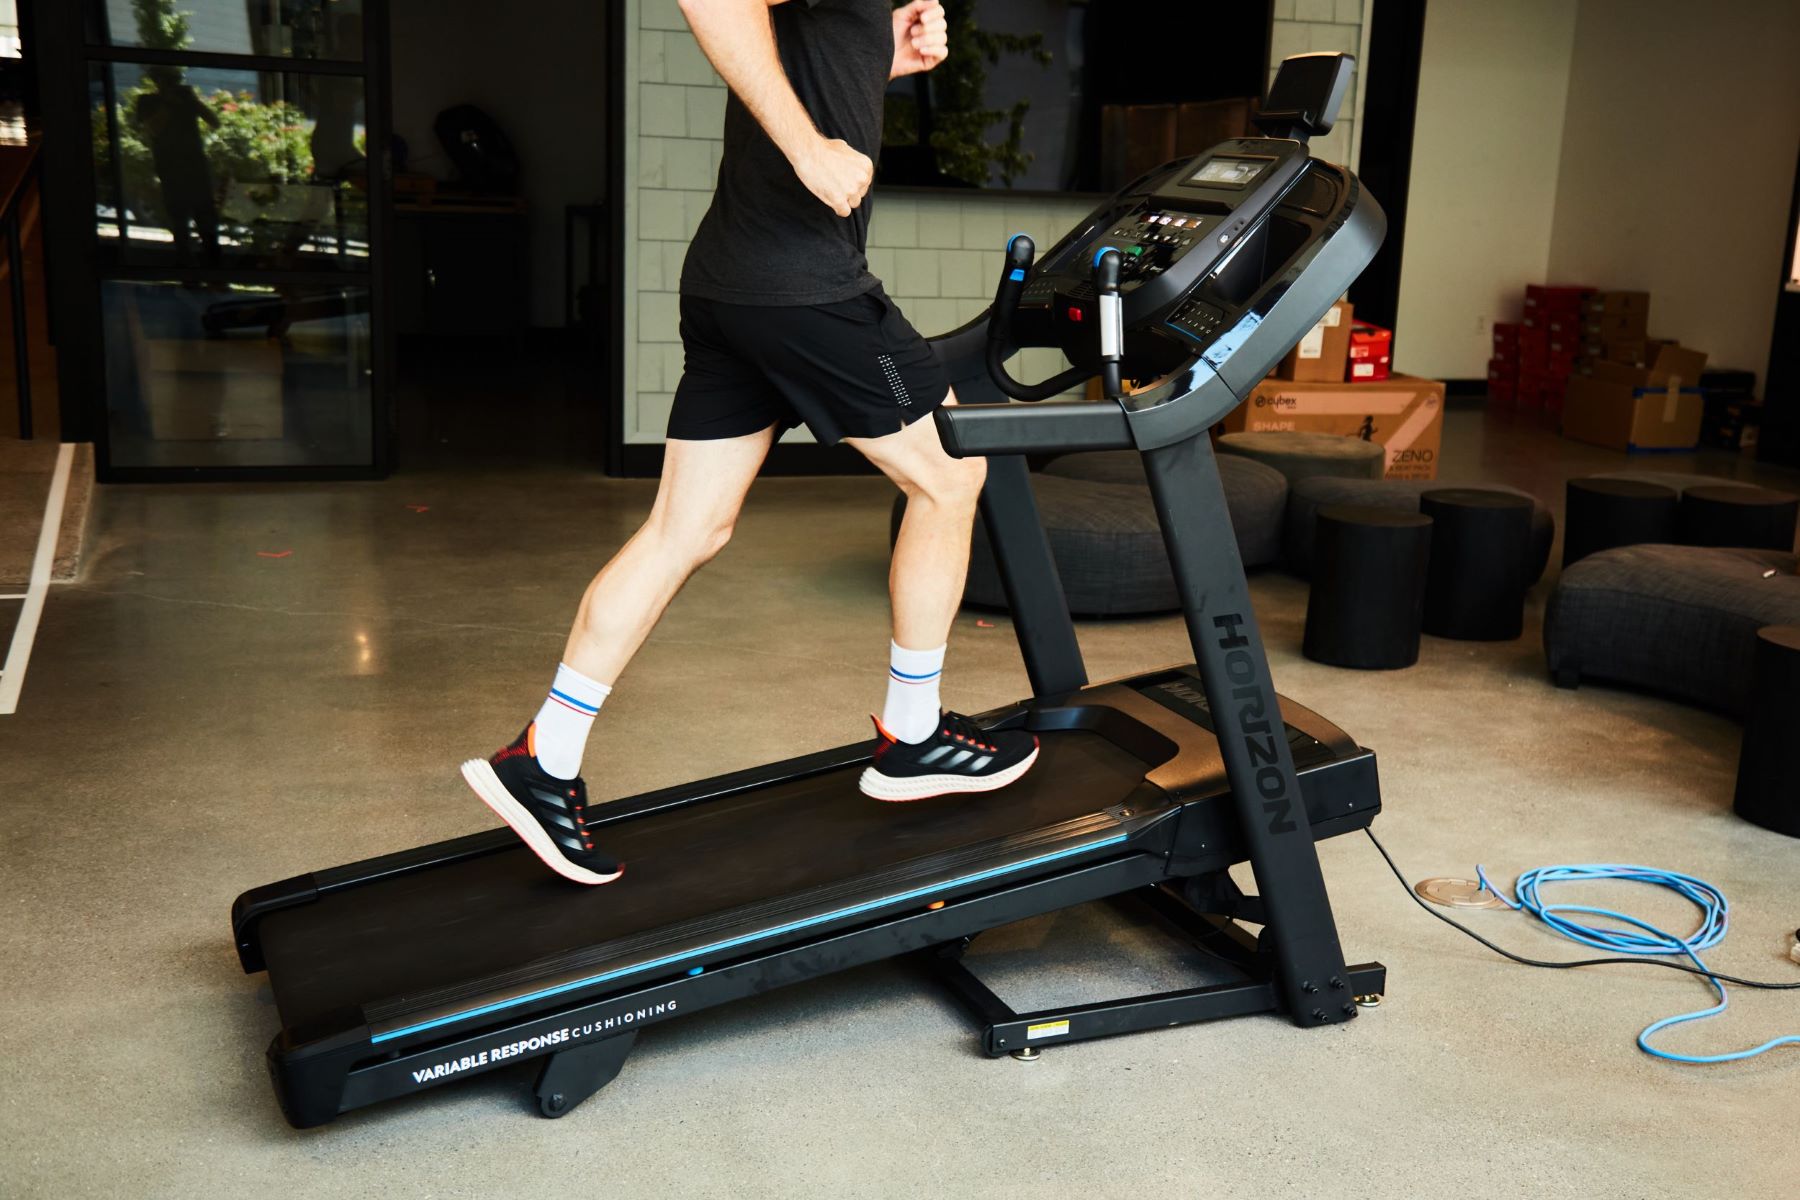 How Much Incline On Treadmill To Simulate Outdoor Running